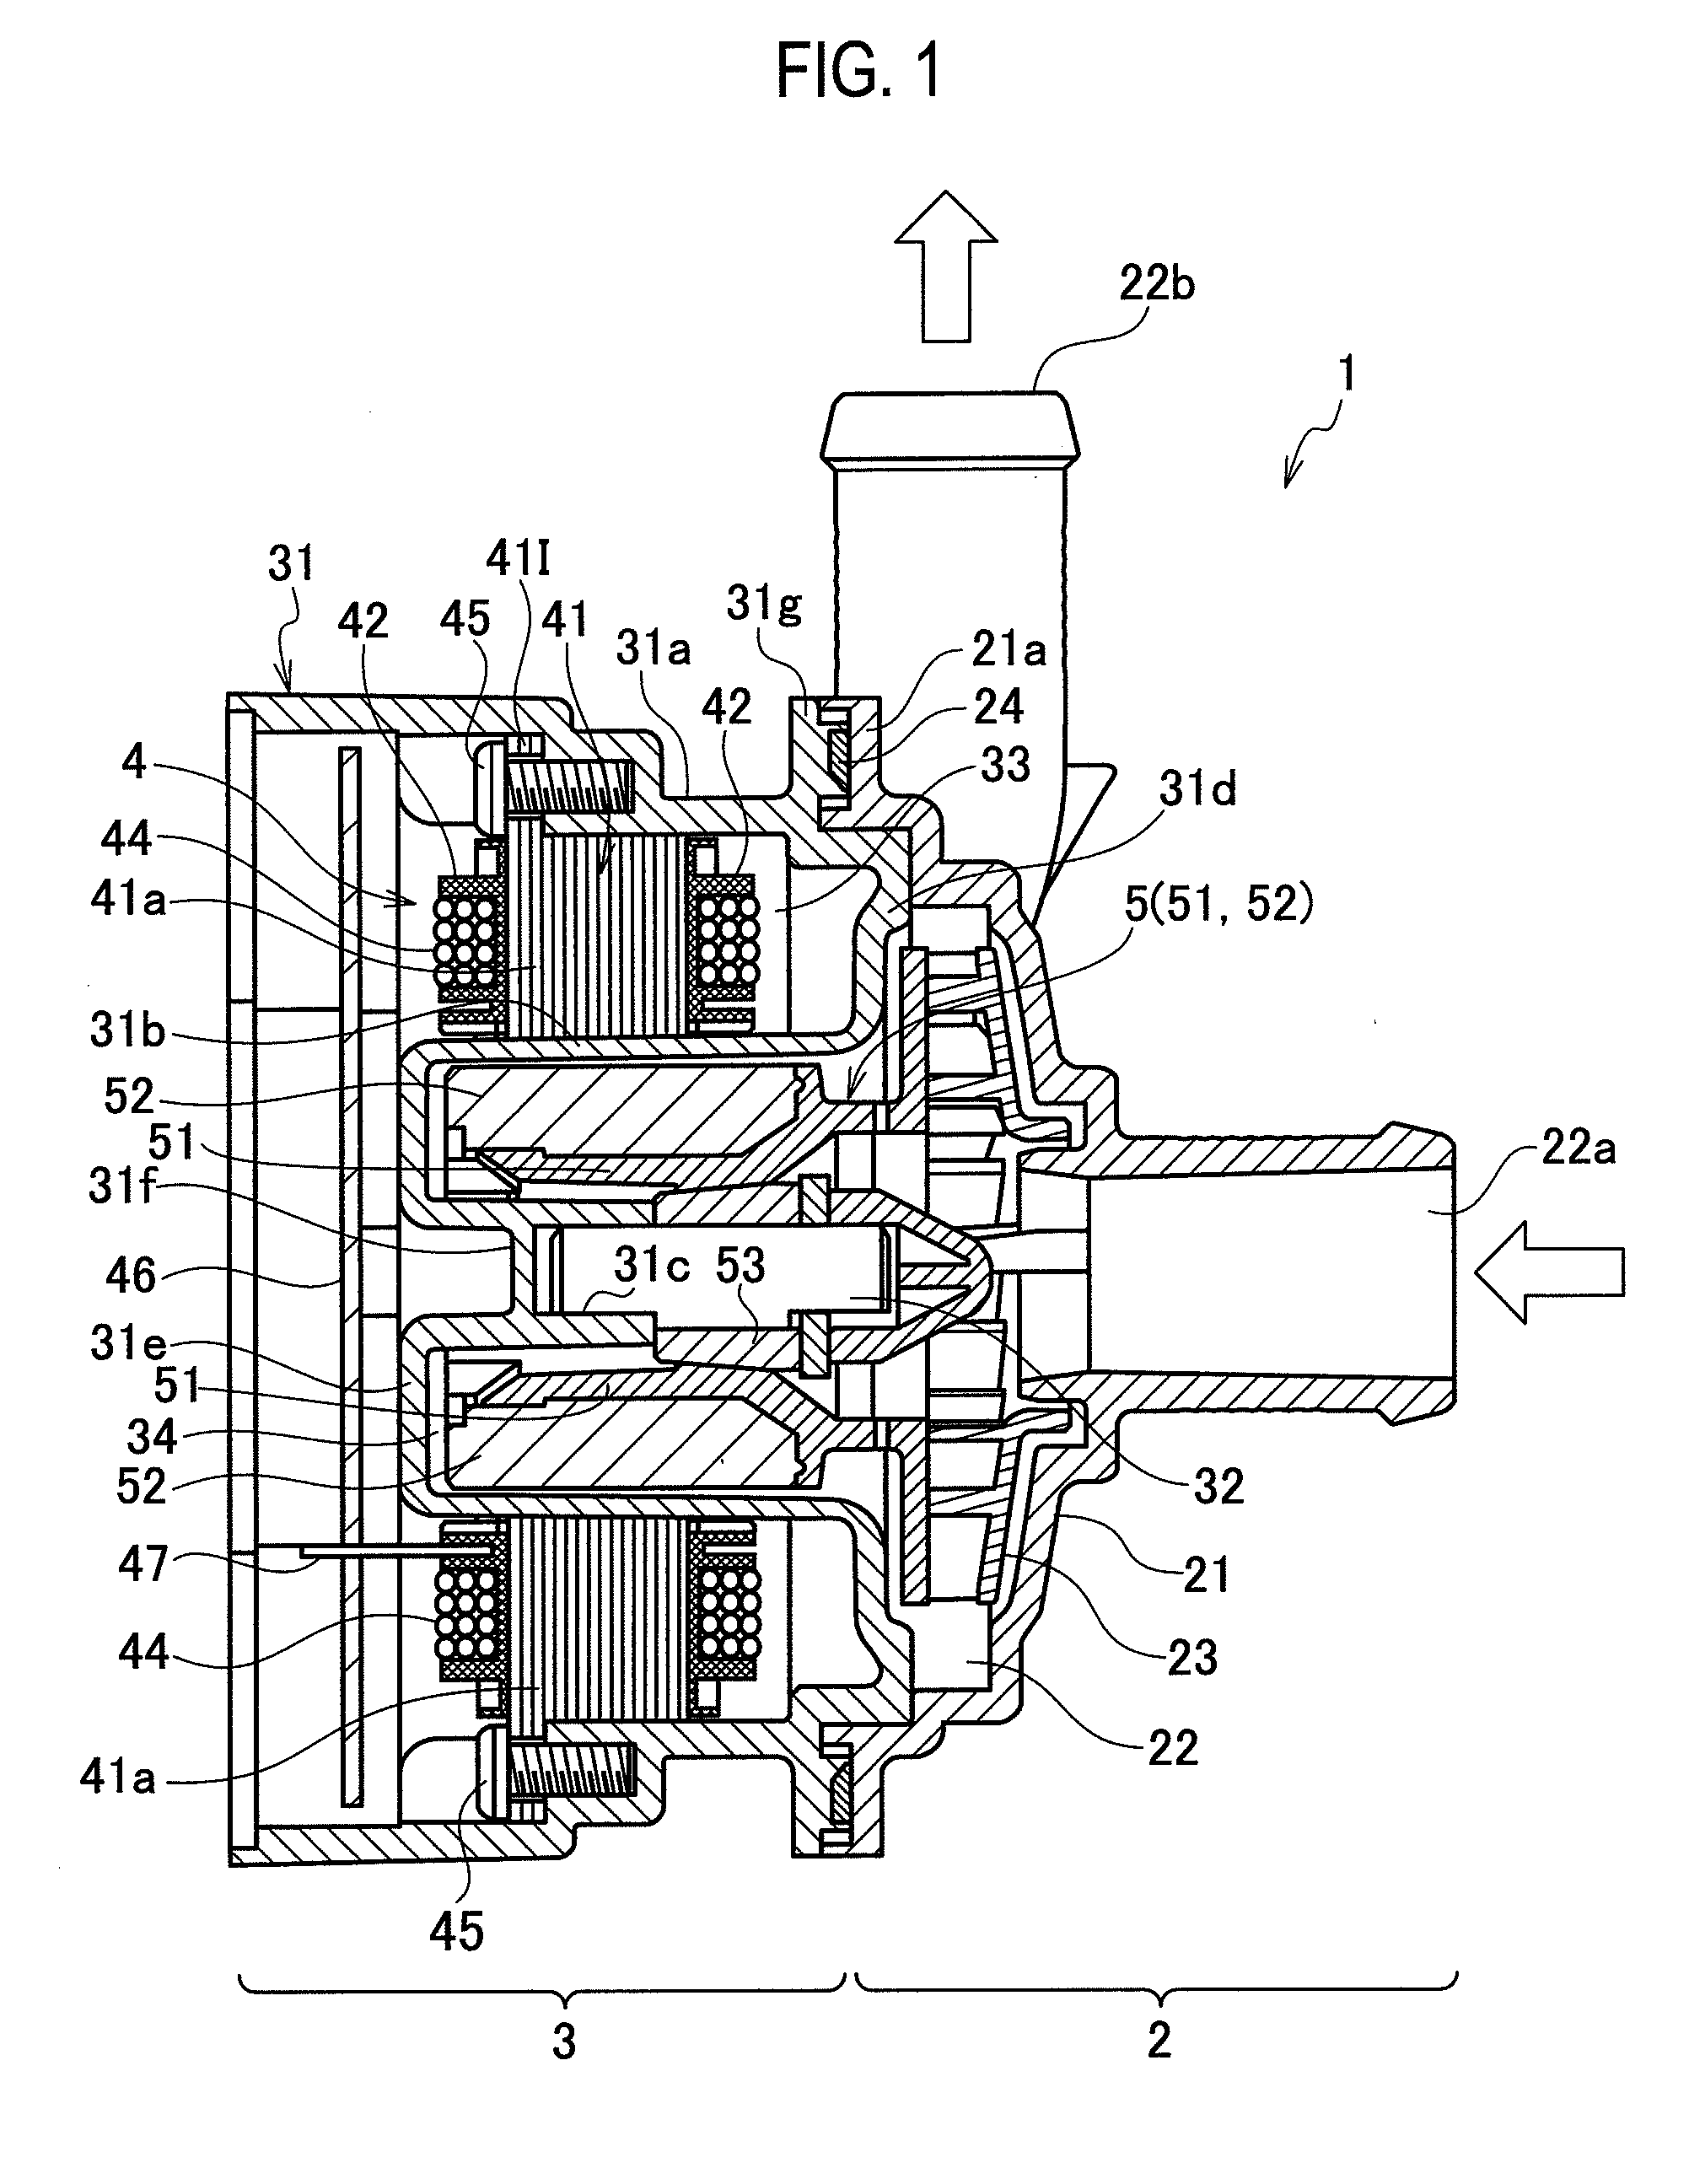 Insulator structure of motor, and motor-integrated pump